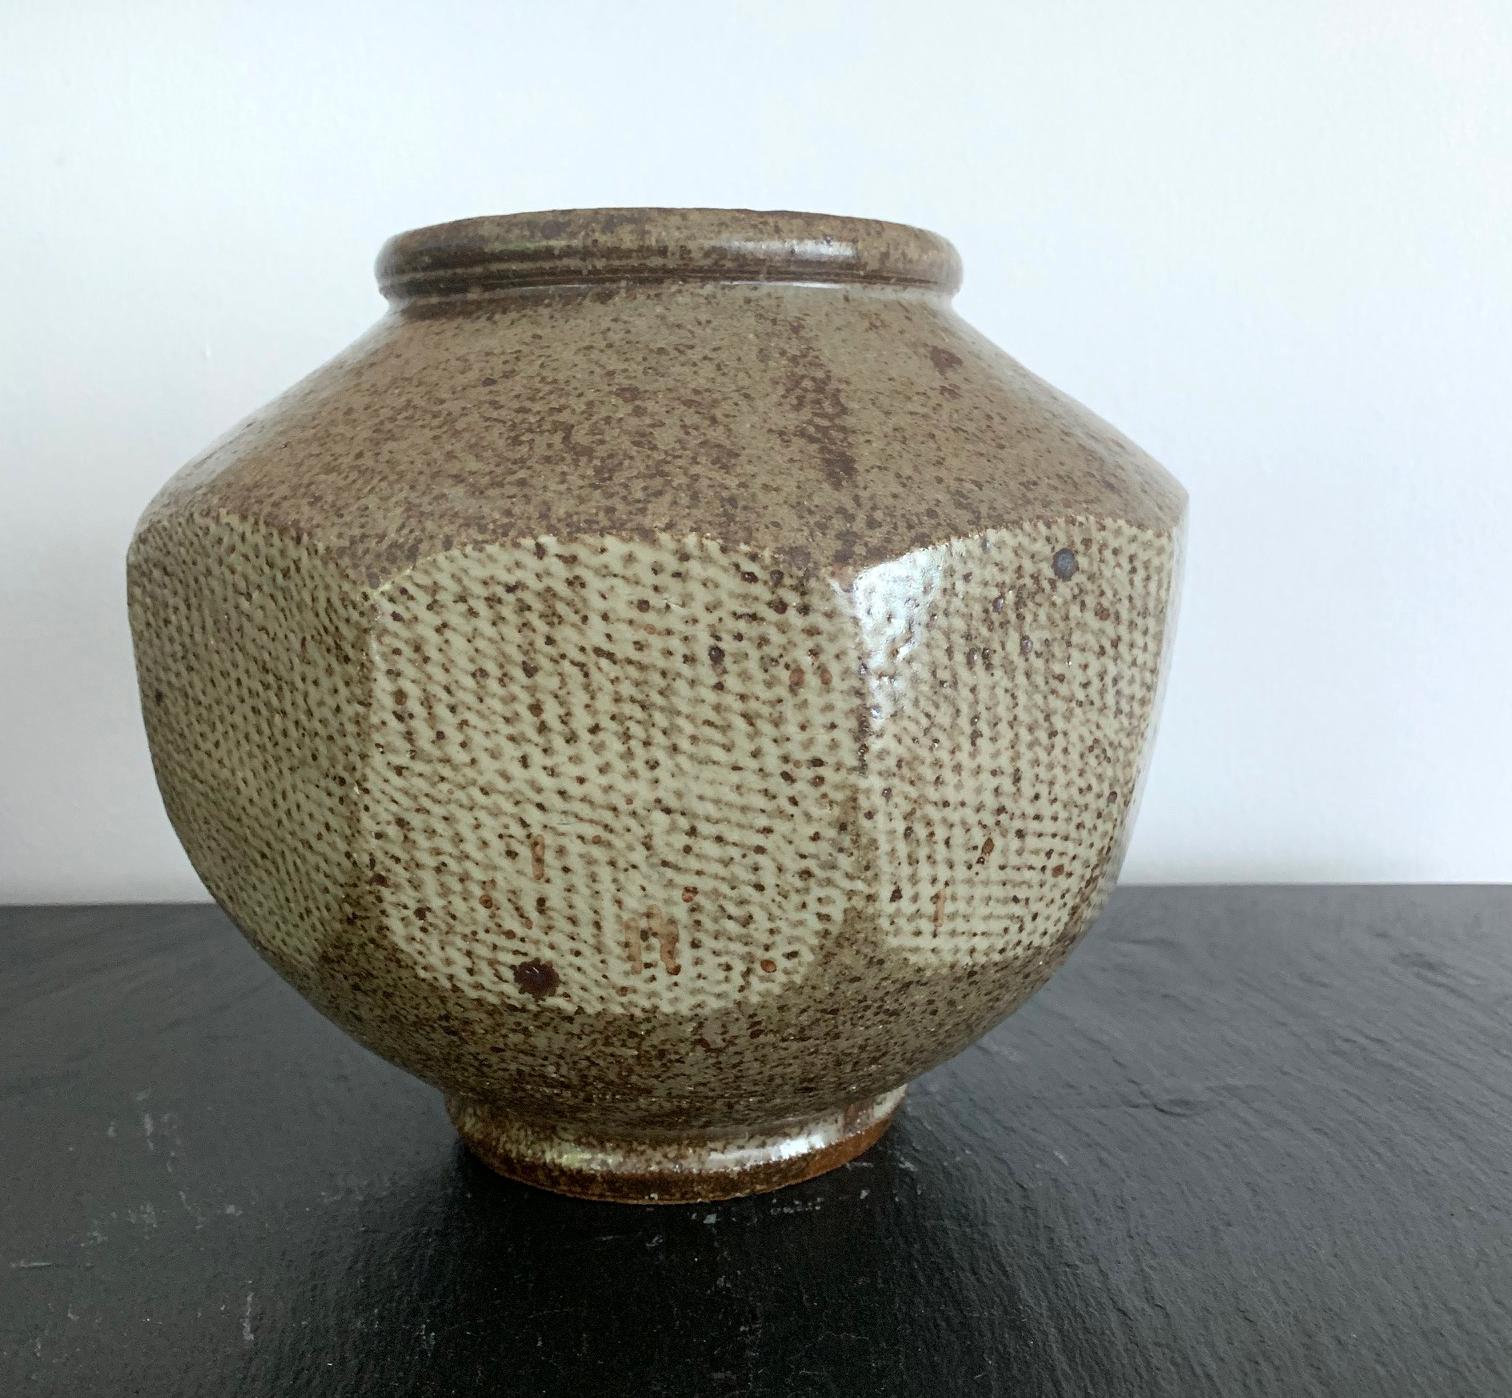 A handsome ceramic stoneware storage jar from Korean Joseon dynasty (1392-1897), circa 15th-16th century. The exterior surface of the pot was hand cut into nonagon planes, which were further decorated with underglaze white slip. The diamond patterns